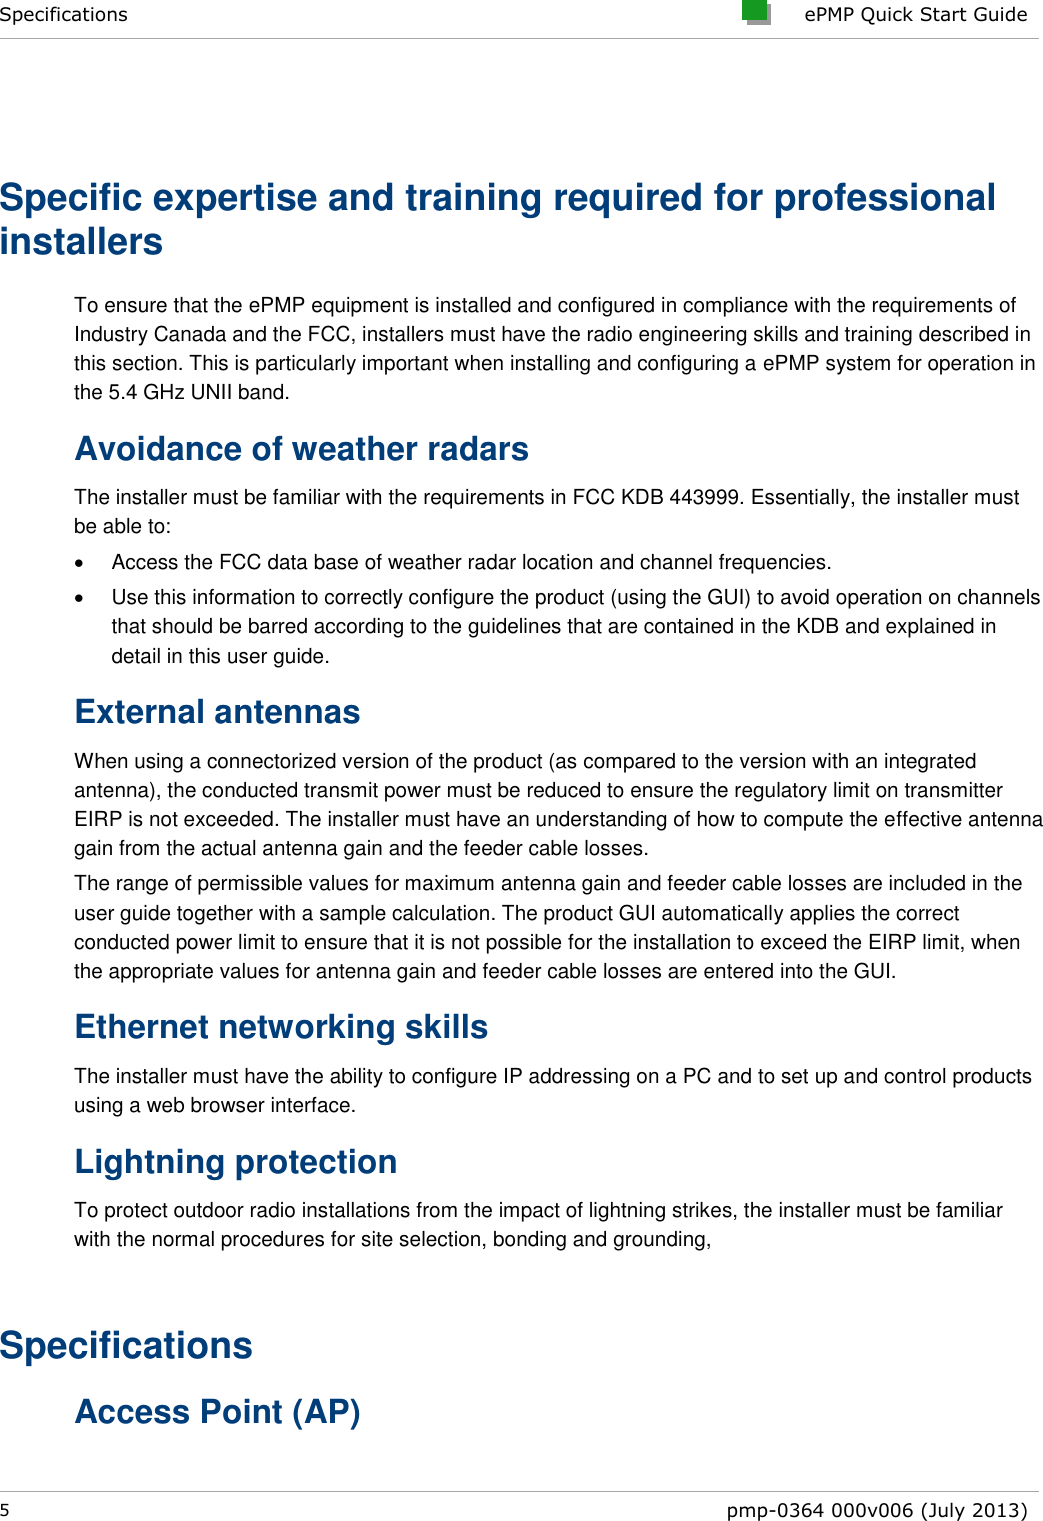 Specifications     ePMP Quick Start Guide  5  pmp-0364 000v006 (July 2013)   Specific expertise and training required for professional installers To ensure that the ePMP equipment is installed and configured in compliance with the requirements of Industry Canada and the FCC, installers must have the radio engineering skills and training described in this section. This is particularly important when installing and configuring a ePMP system for operation in the 5.4 GHz UNII band. Avoidance of weather radars The installer must be familiar with the requirements in FCC KDB 443999. Essentially, the installer must be able to:   Access the FCC data base of weather radar location and channel frequencies.   Use this information to correctly configure the product (using the GUI) to avoid operation on channels that should be barred according to the guidelines that are contained in the KDB and explained in detail in this user guide. External antennas When using a connectorized version of the product (as compared to the version with an integrated antenna), the conducted transmit power must be reduced to ensure the regulatory limit on transmitter EIRP is not exceeded. The installer must have an understanding of how to compute the effective antenna gain from the actual antenna gain and the feeder cable losses. The range of permissible values for maximum antenna gain and feeder cable losses are included in the user guide together with a sample calculation. The product GUI automatically applies the correct conducted power limit to ensure that it is not possible for the installation to exceed the EIRP limit, when the appropriate values for antenna gain and feeder cable losses are entered into the GUI. Ethernet networking skills The installer must have the ability to configure IP addressing on a PC and to set up and control products using a web browser interface. Lightning protection To protect outdoor radio installations from the impact of lightning strikes, the installer must be familiar with the normal procedures for site selection, bonding and grounding,  Specifications Access Point (AP) 